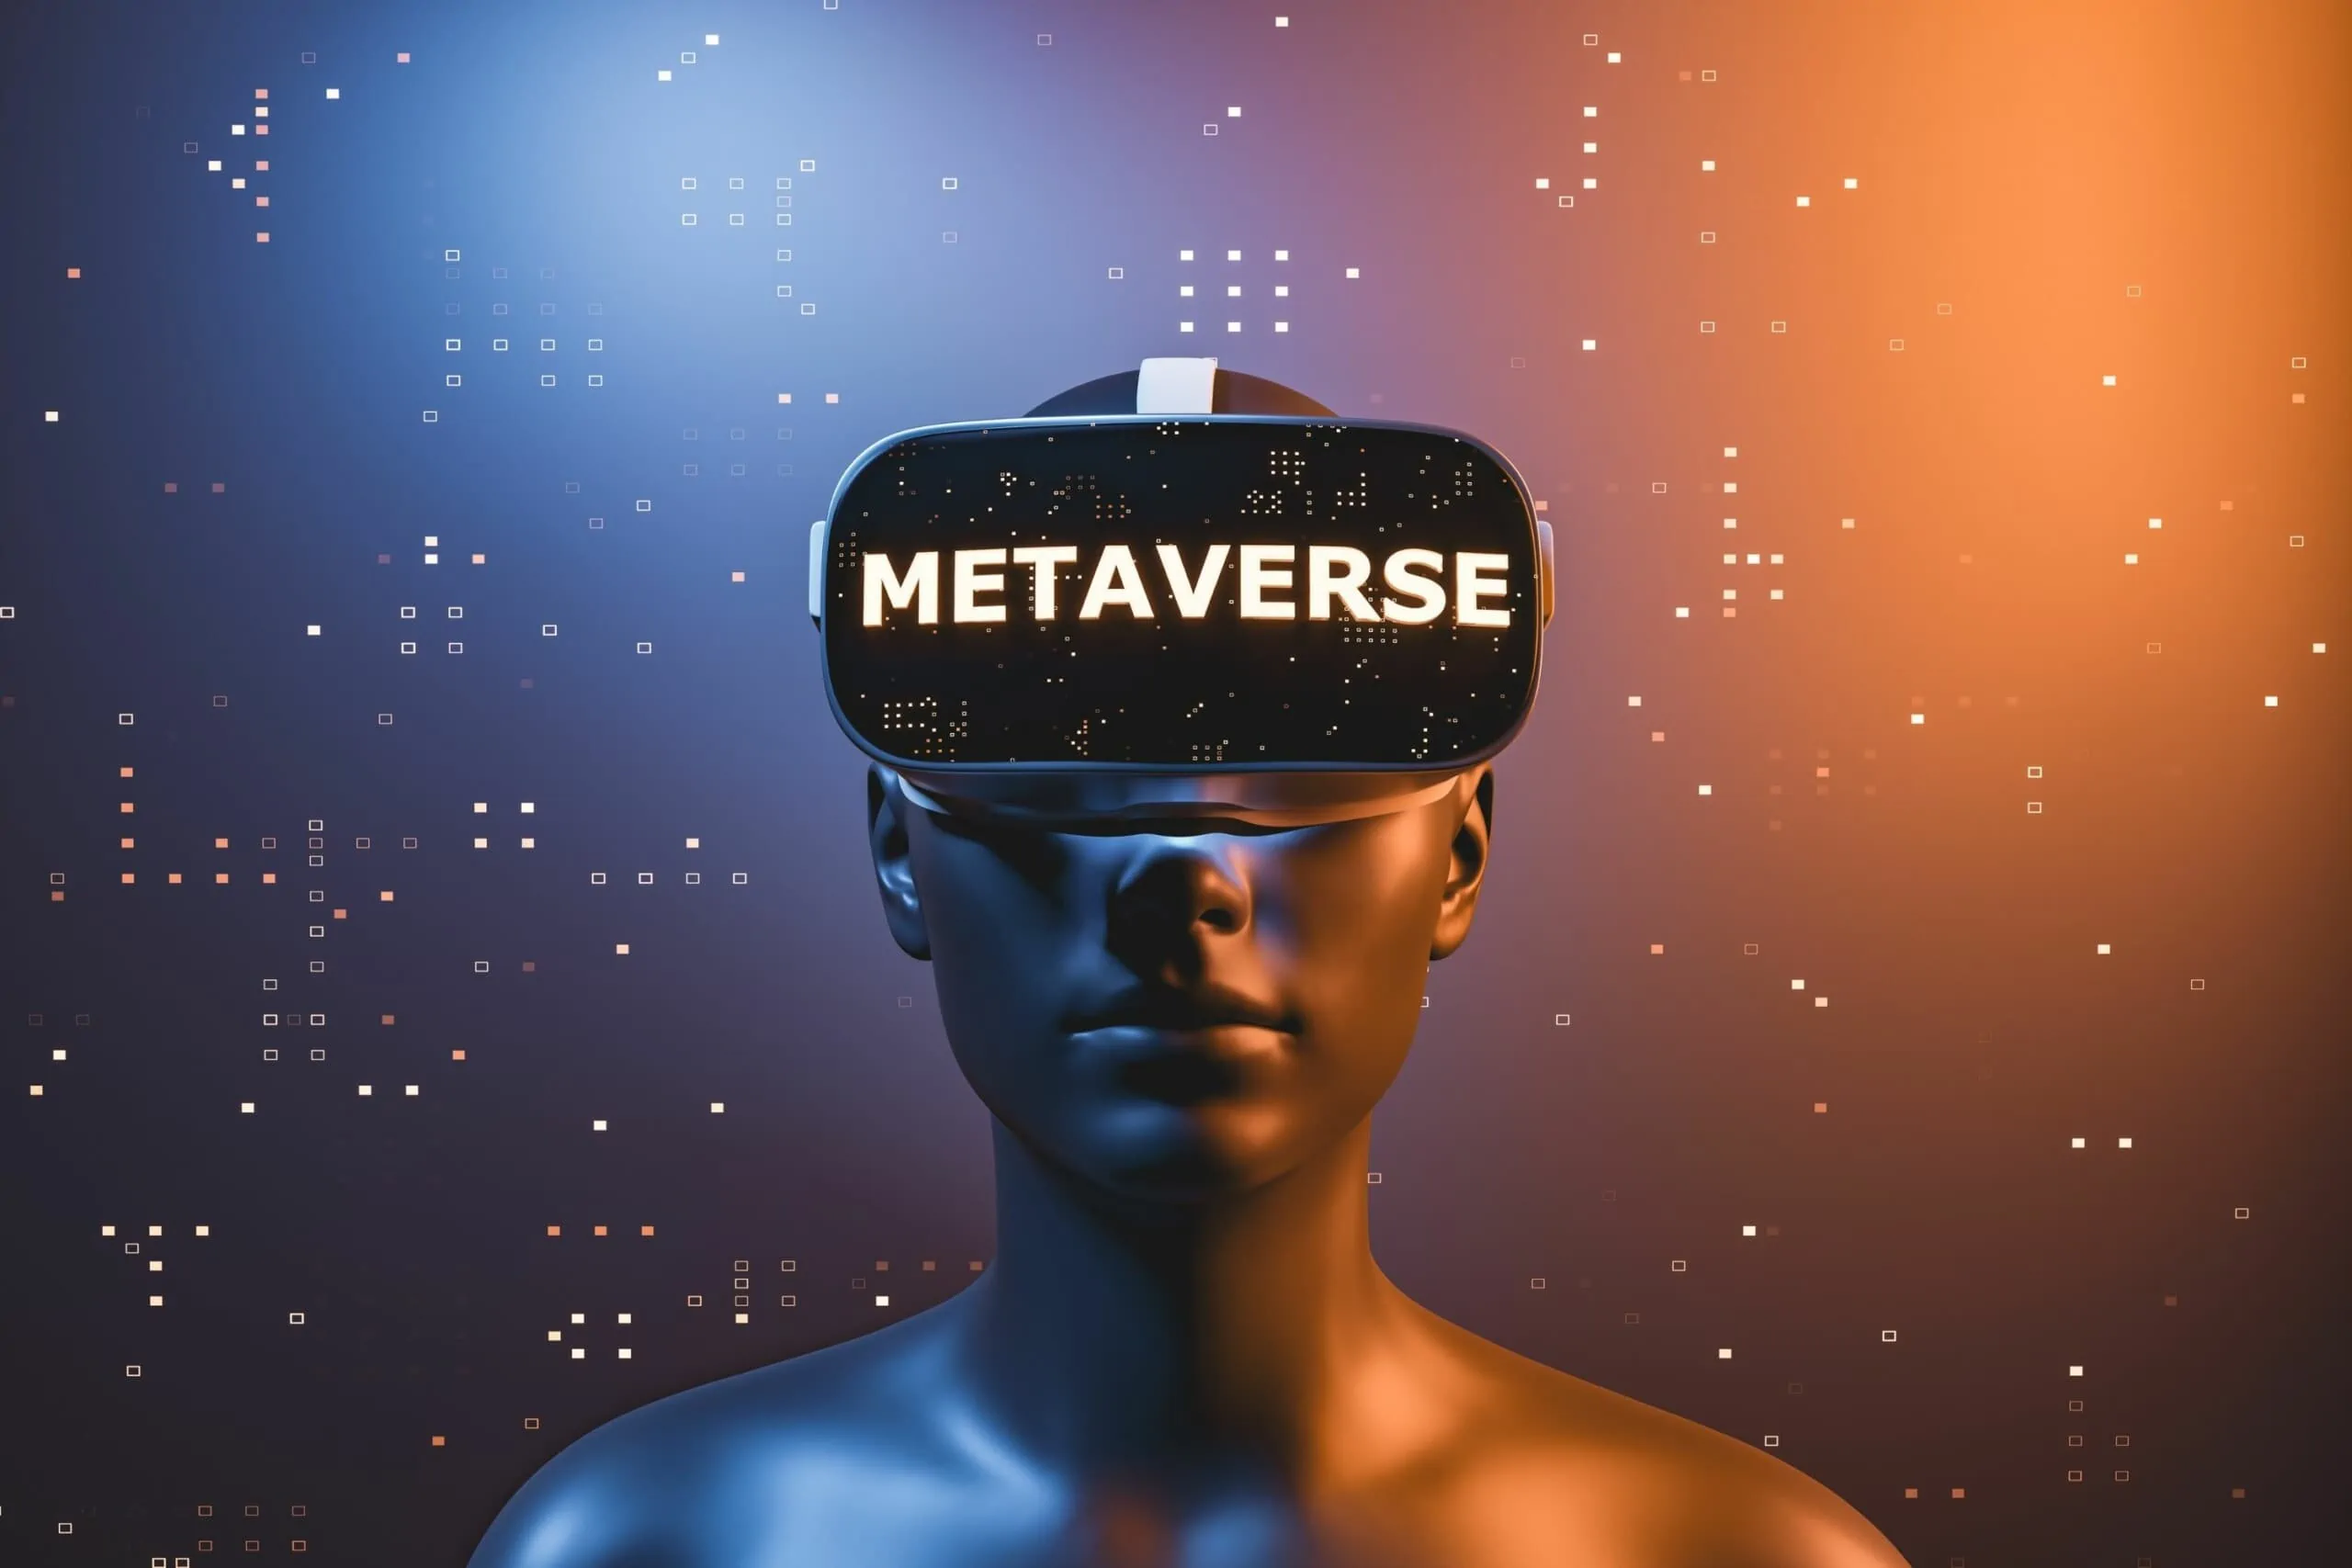 The True value of Metaverse unleashed in 2022